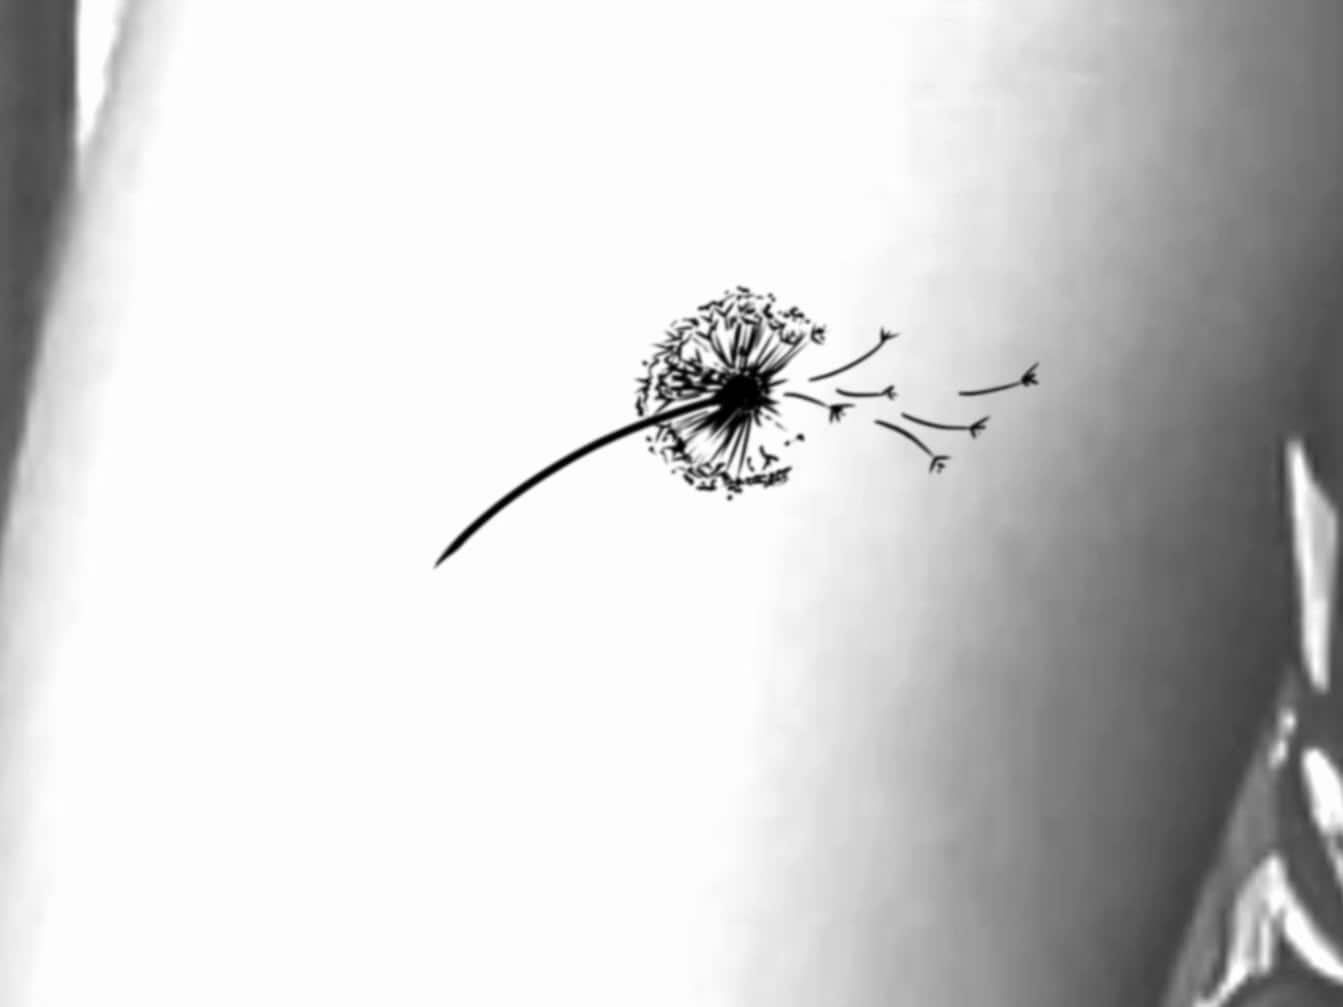 bob plotts recommends flower blowing in the wind tattoo pic